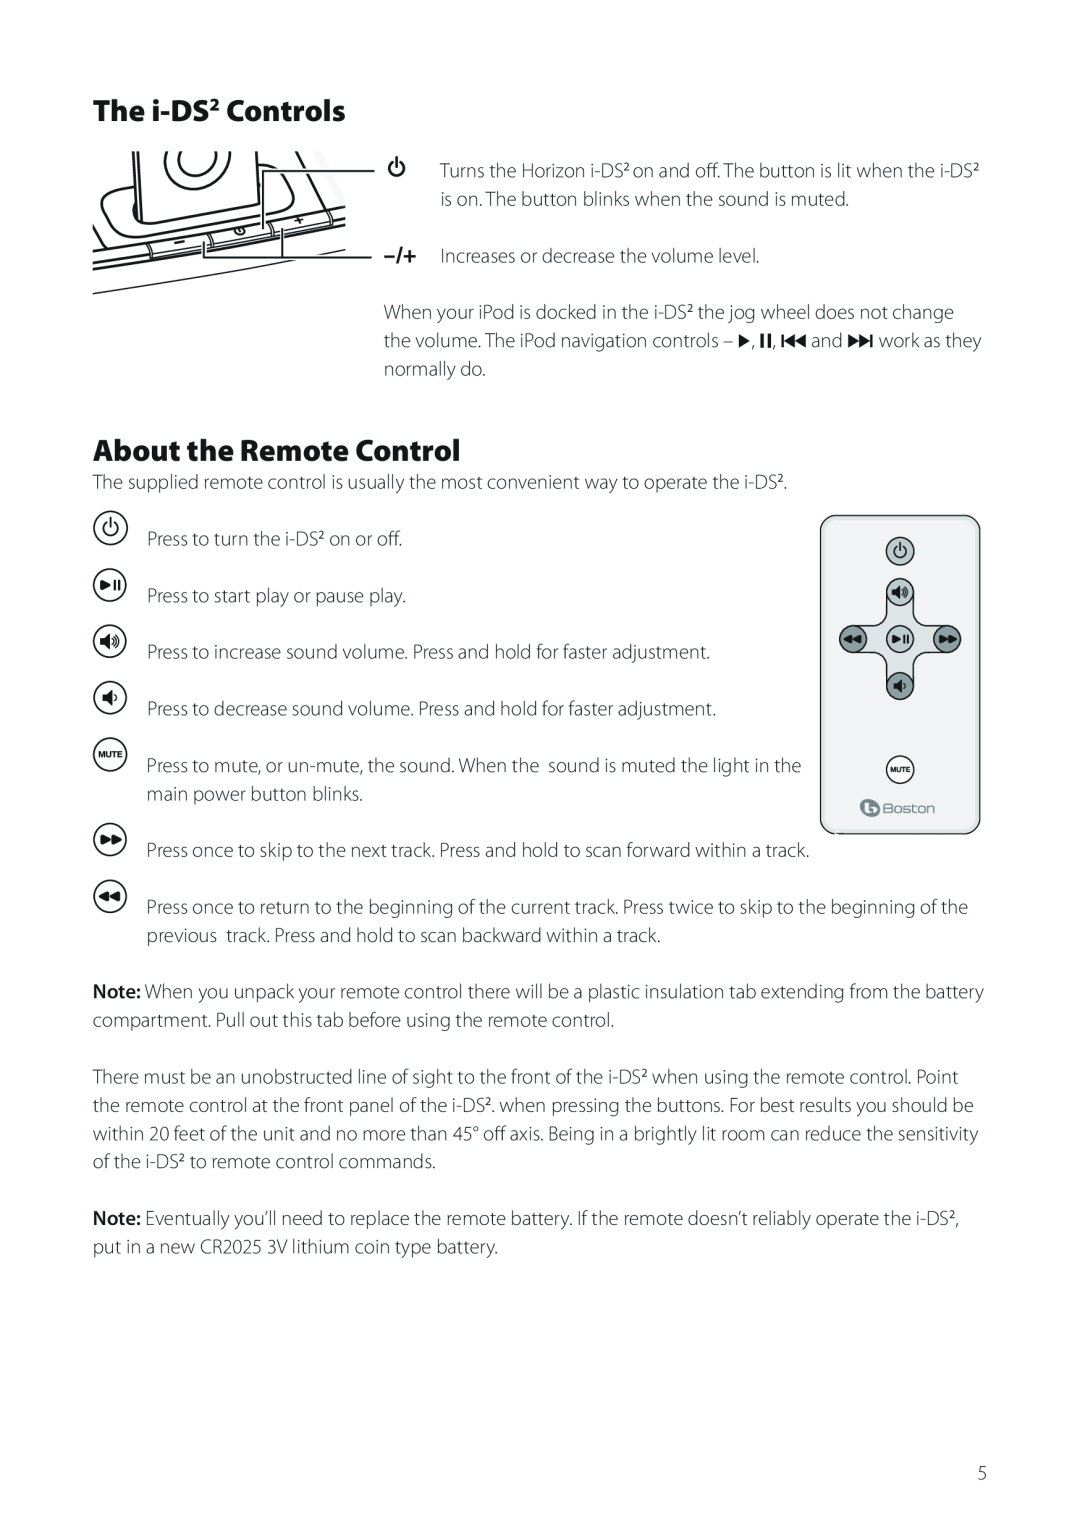 Boston Acoustics Horizon i-DS2 owner manual The i-DS2 Controls, About the Remote Control 